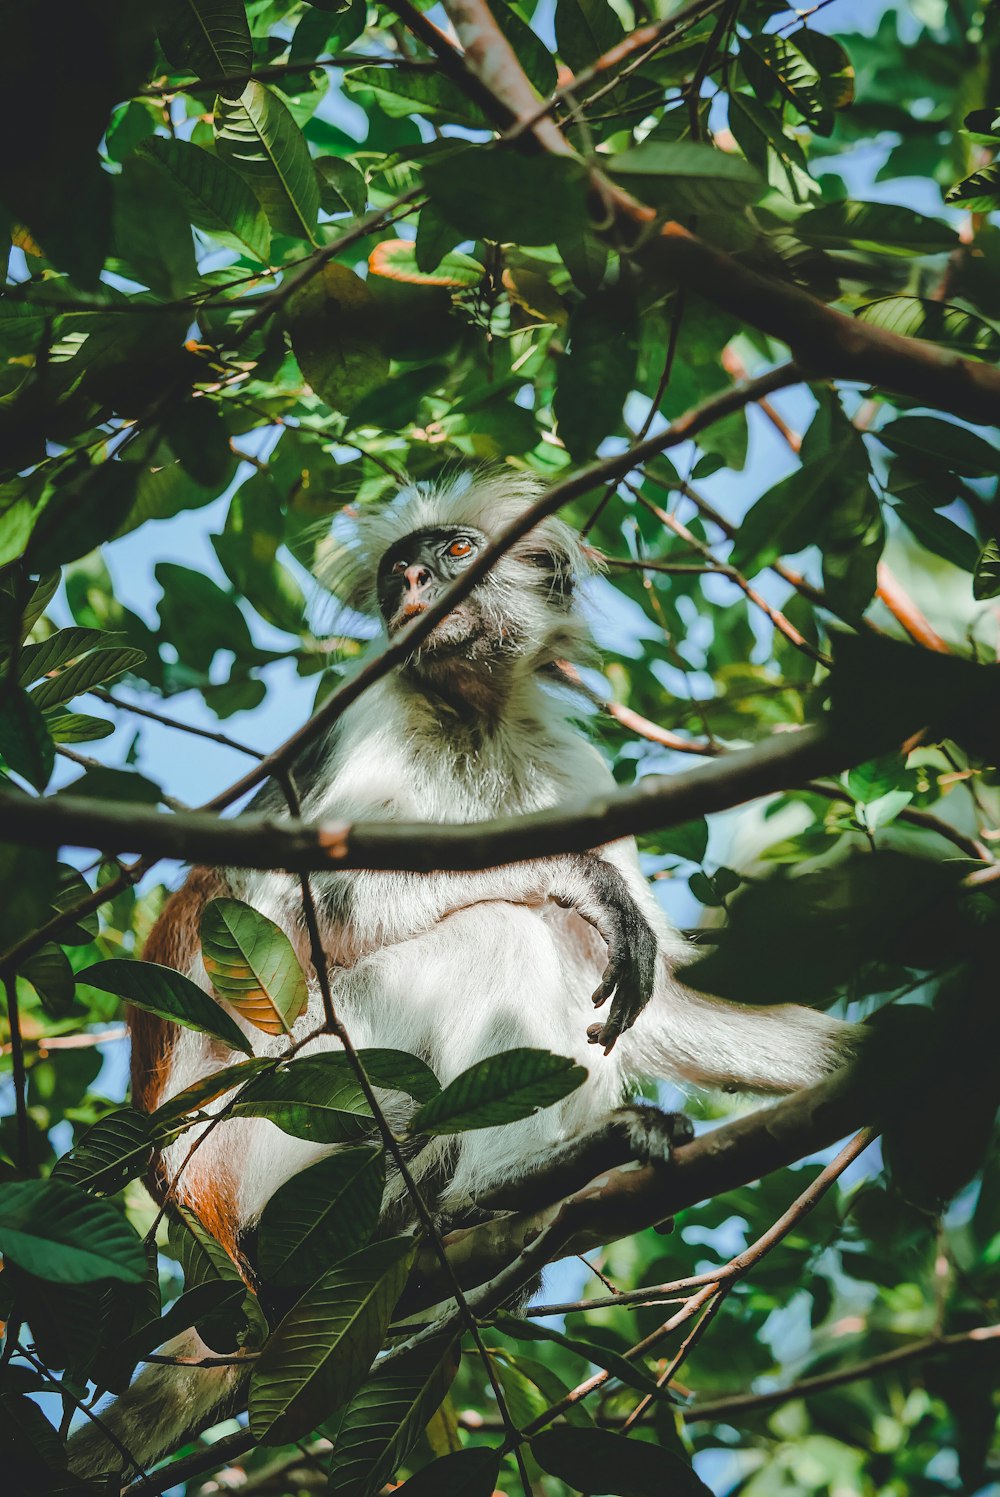 white and black monkey on tree branch during daytime